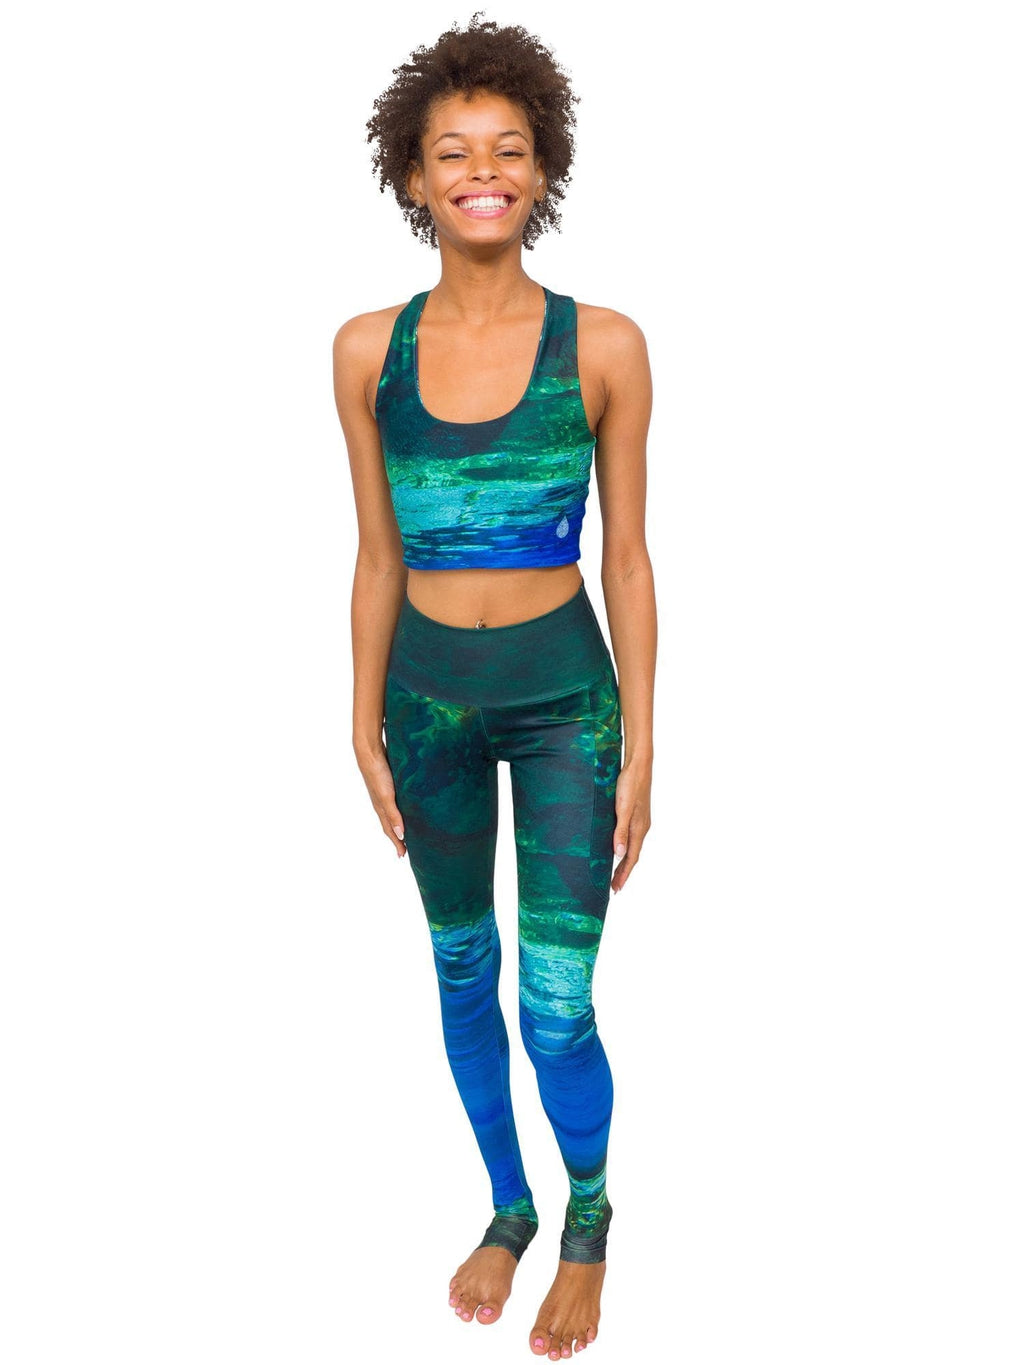 Model: Syriah is a sea turtle conservation biologist. She is 5&#39;7&quot;, 111 lbs and is wearing a size S top and XS legging.